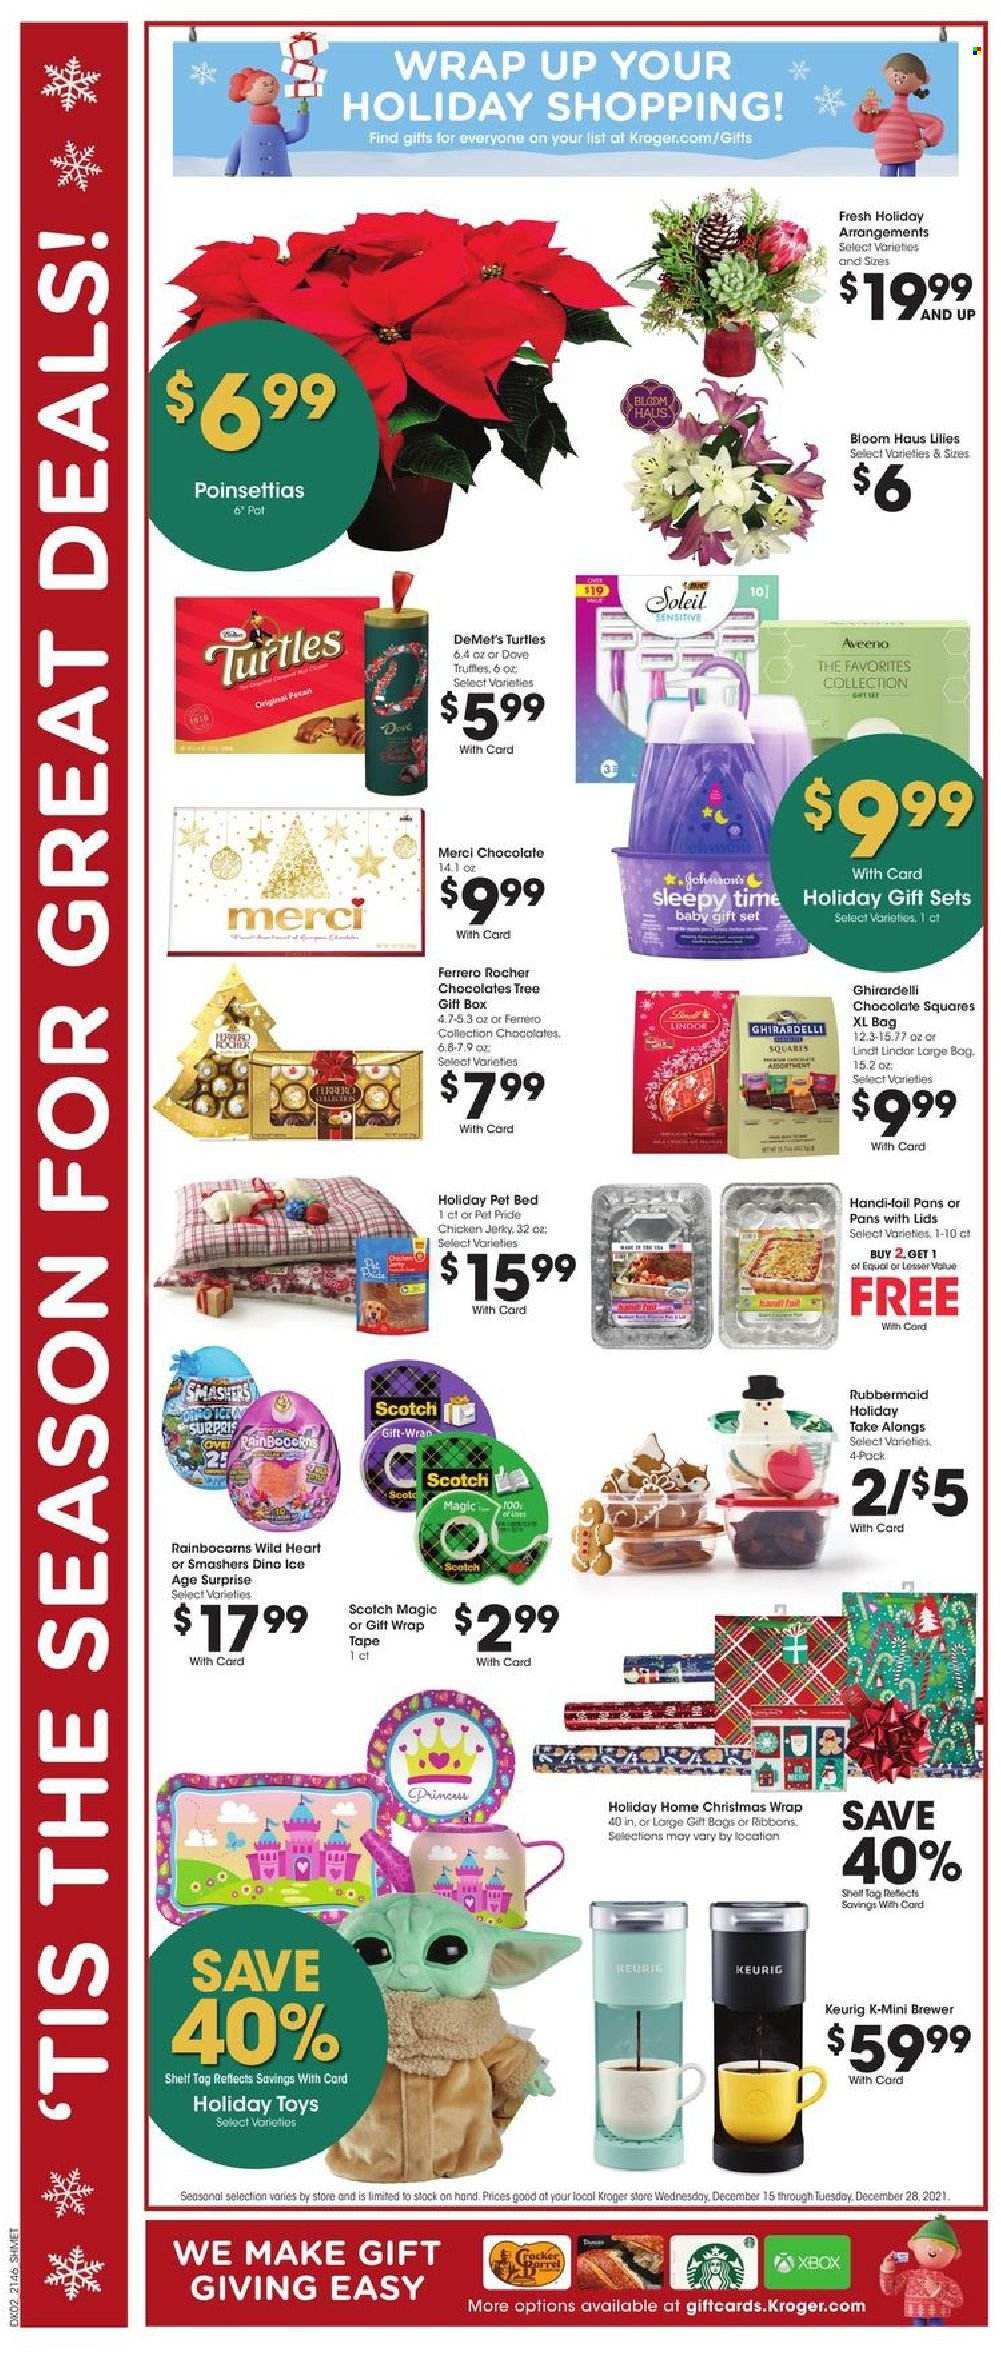 thumbnail - Kroger Flyer - 12/15/2021 - 12/28/2021 - Sales products - jerky, gift set, chocolate, Lindt, Lindor, Ferrero Rocher, truffles, Merci, Ghirardelli, brewer, Keurig, Aveeno, Dove, bag, pot, gift box, gift wrap, christmas wrap, pet bed, turtles, Xbox, toys, poinsettia, Shell. Page 3.